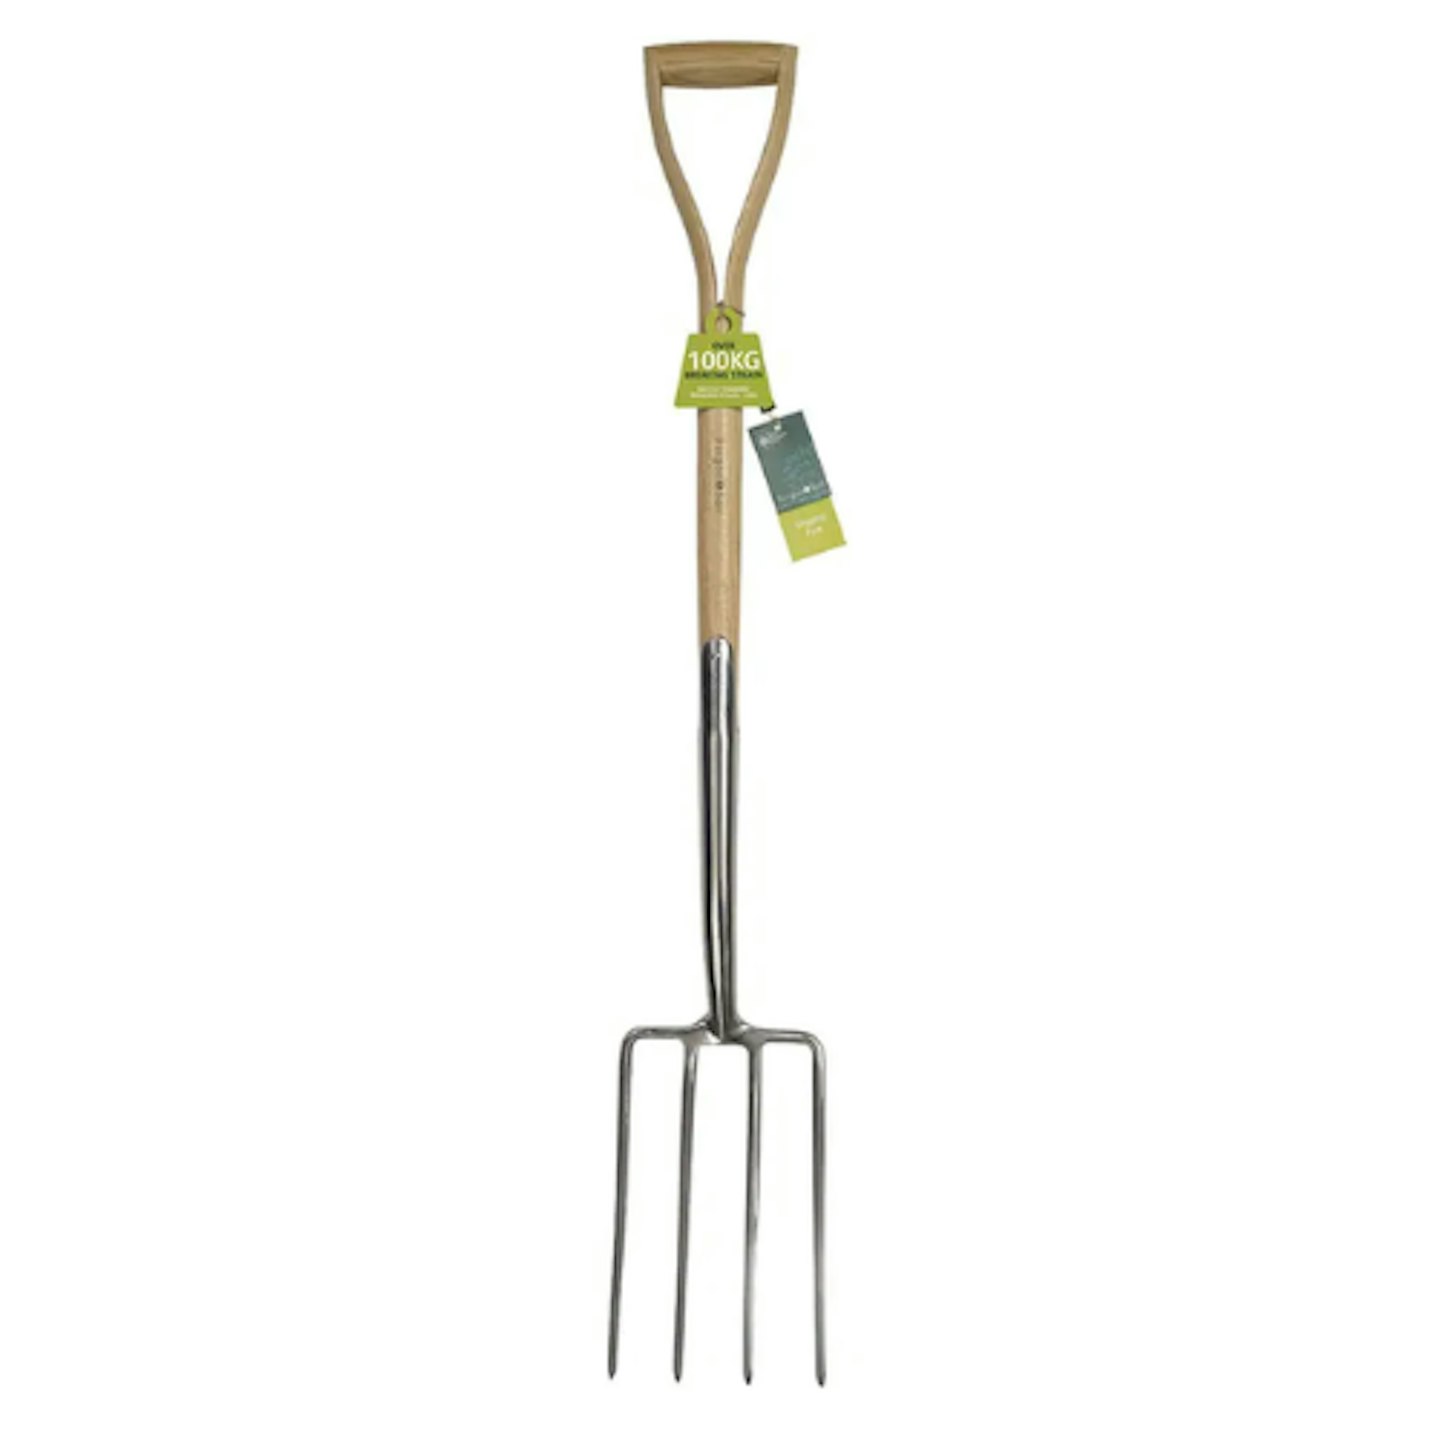 RHS Burgon and Ball stainless steel digging fork